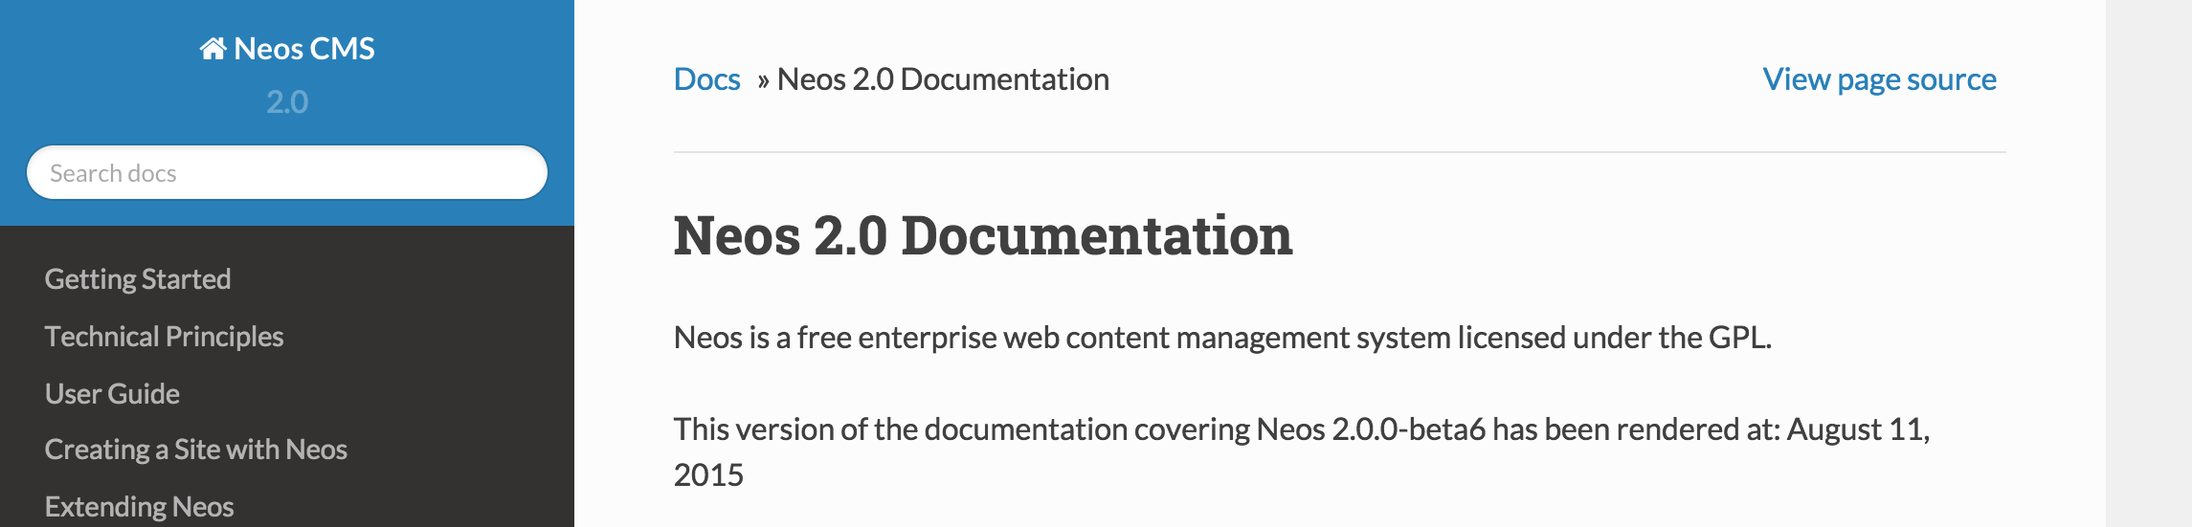 Neos uses ReadTheDocs from now on